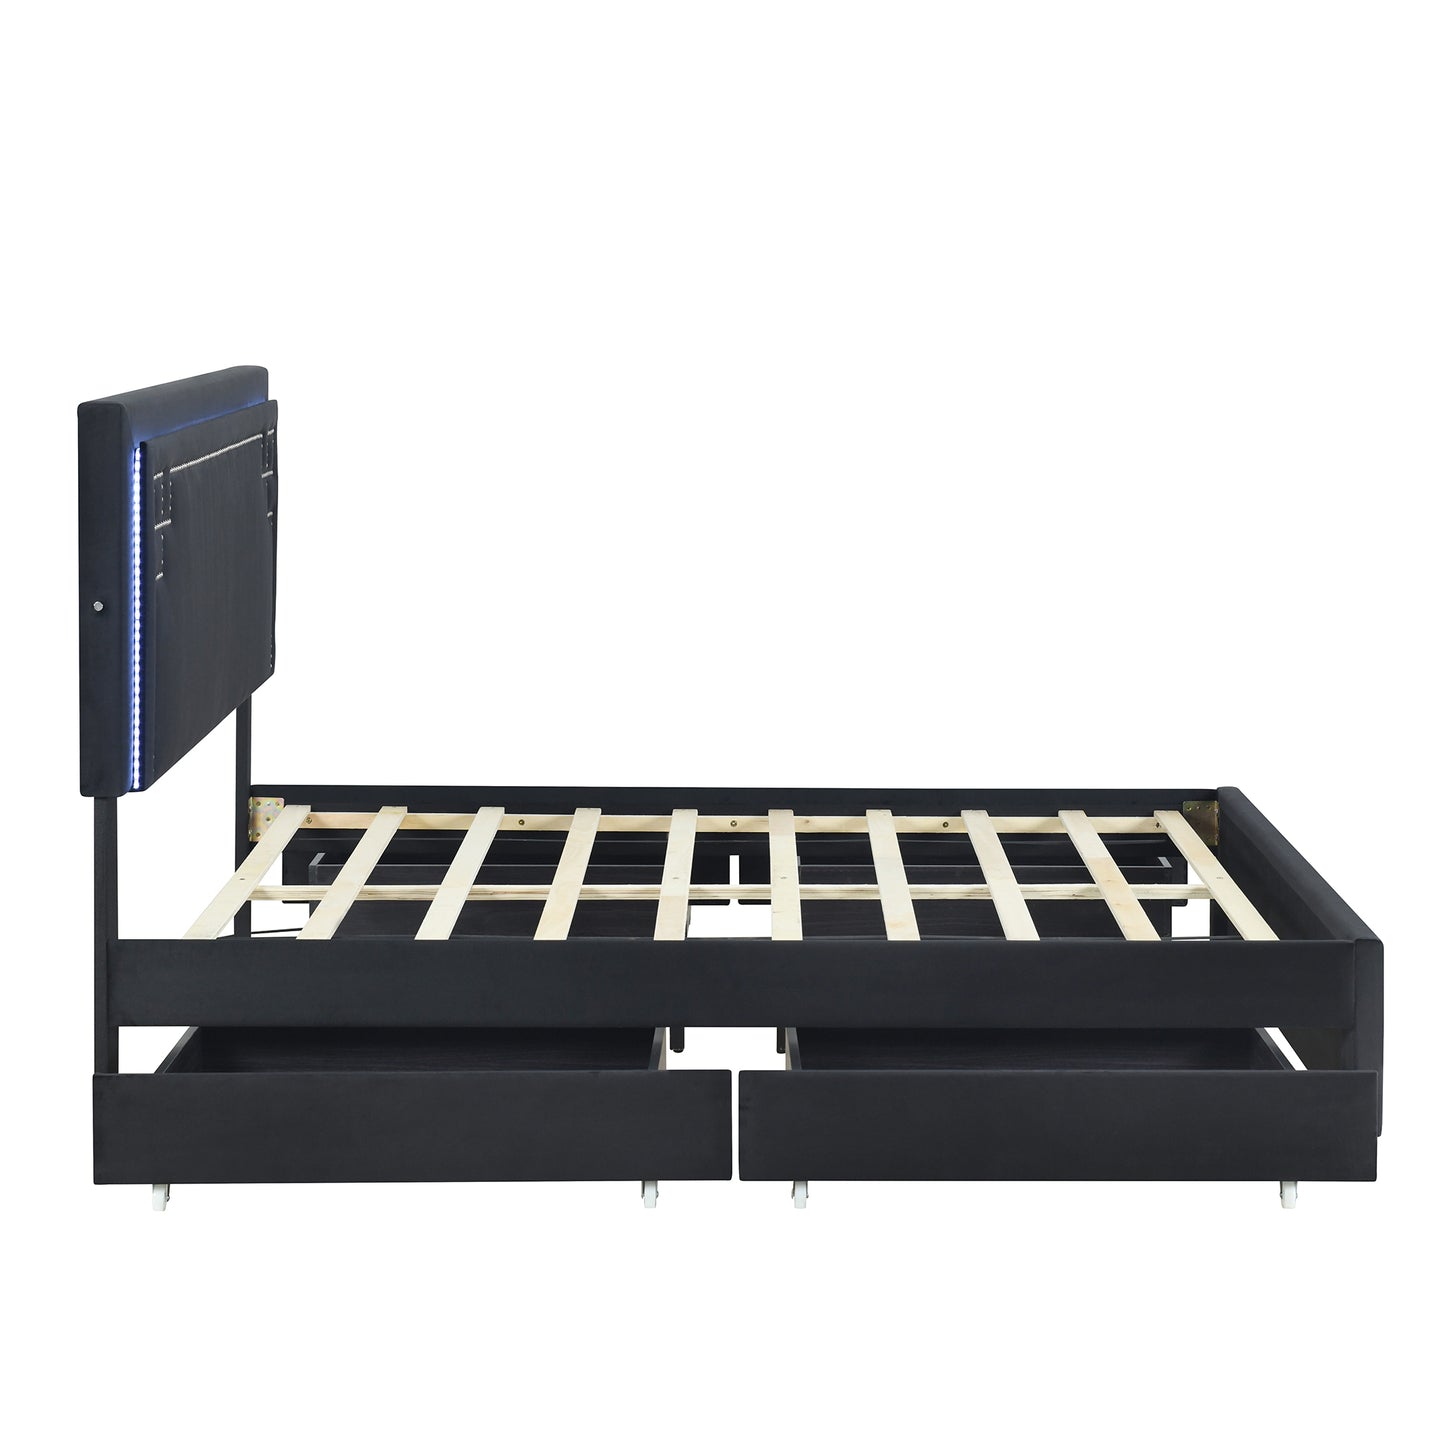 Queen Size Upholstered Platform Bed with Rivet-decorated Headboard, LED bed frame and 4 Drawers, Black